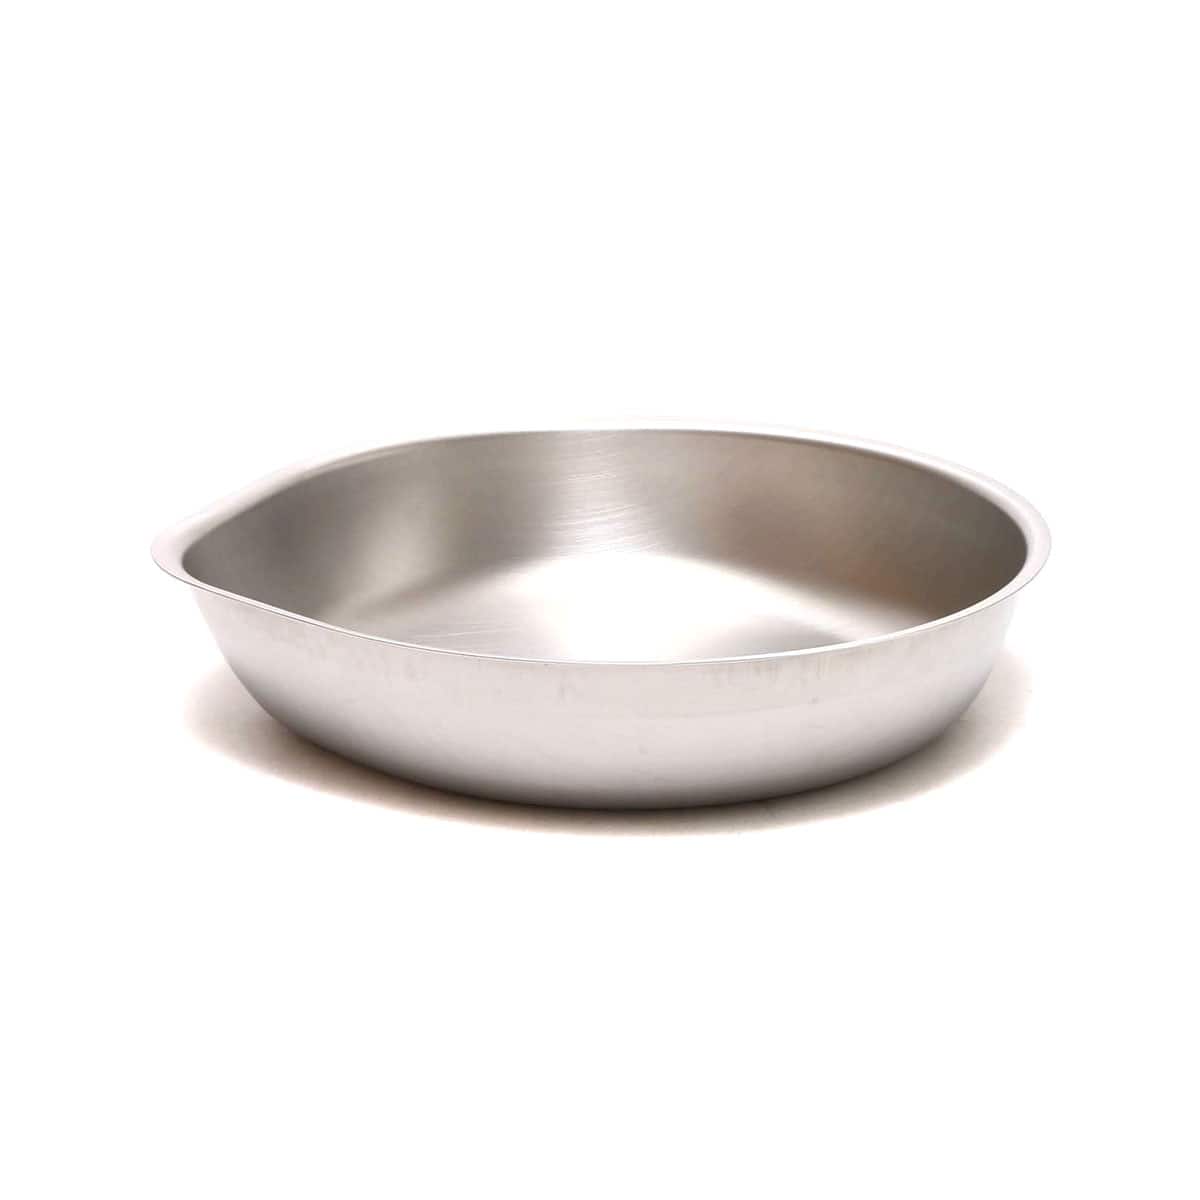 ARMS　THE　BOWL　SILVER　FACE　NORTH　M　LAND　22SS-I